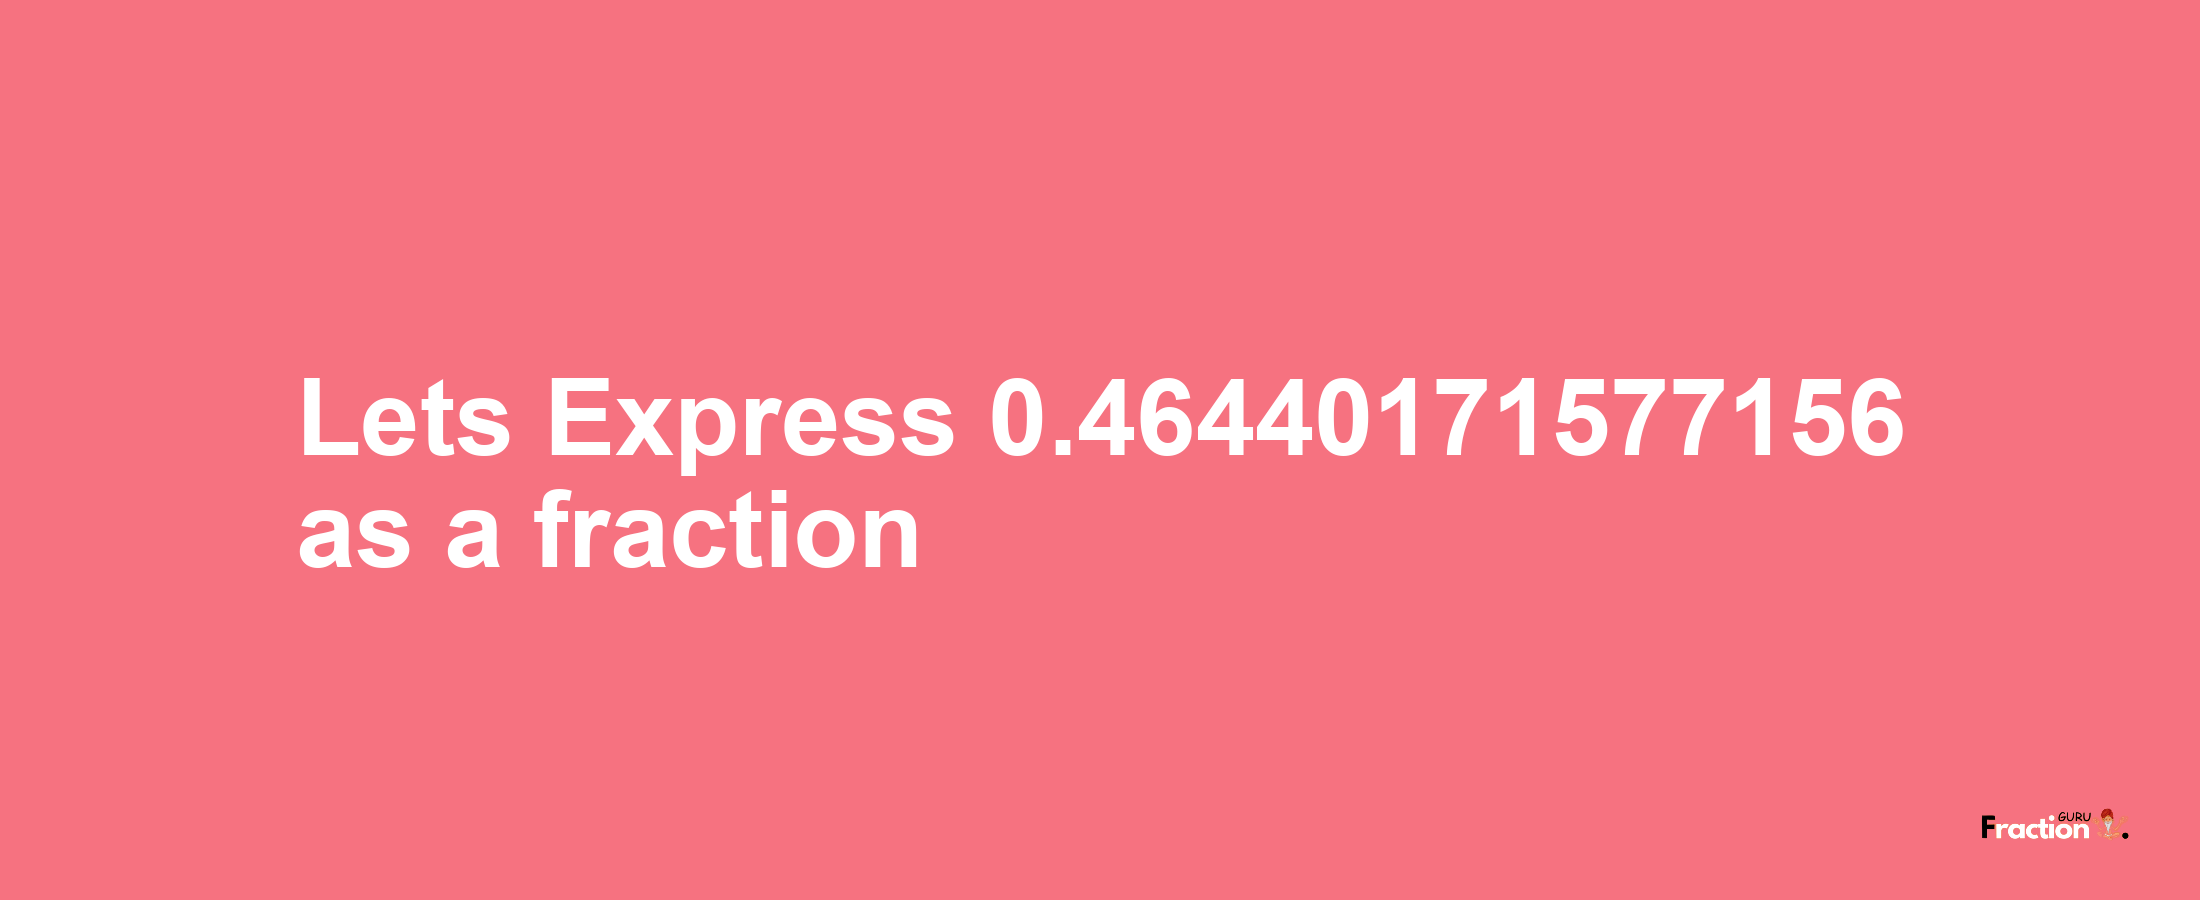 Lets Express 0.46440171577156 as afraction